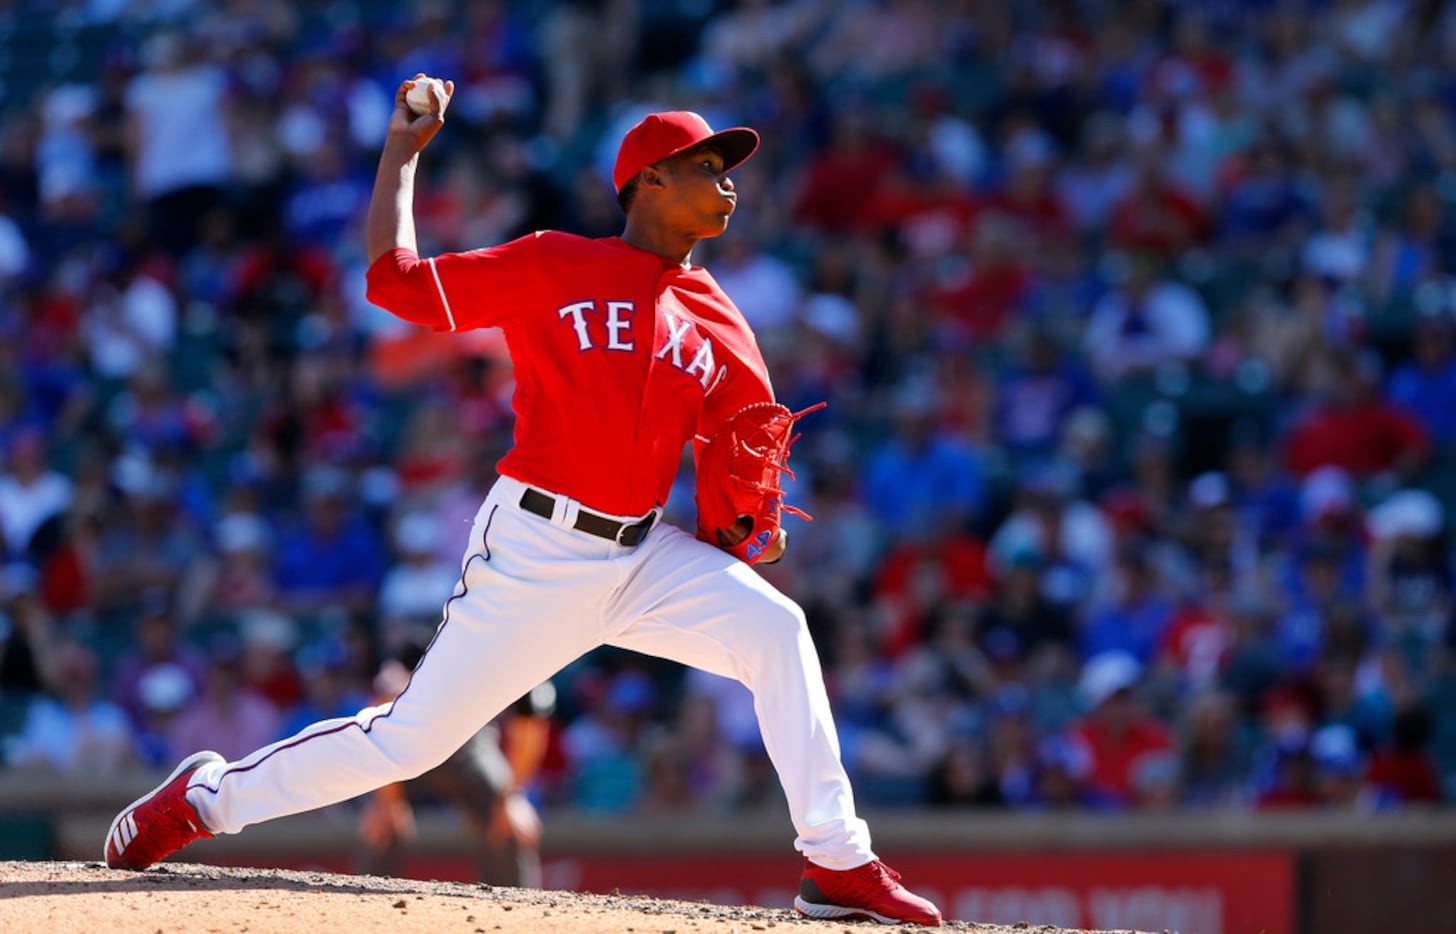 José LeClerc closed the door for Rangers on opening day, but efficiency  remains key